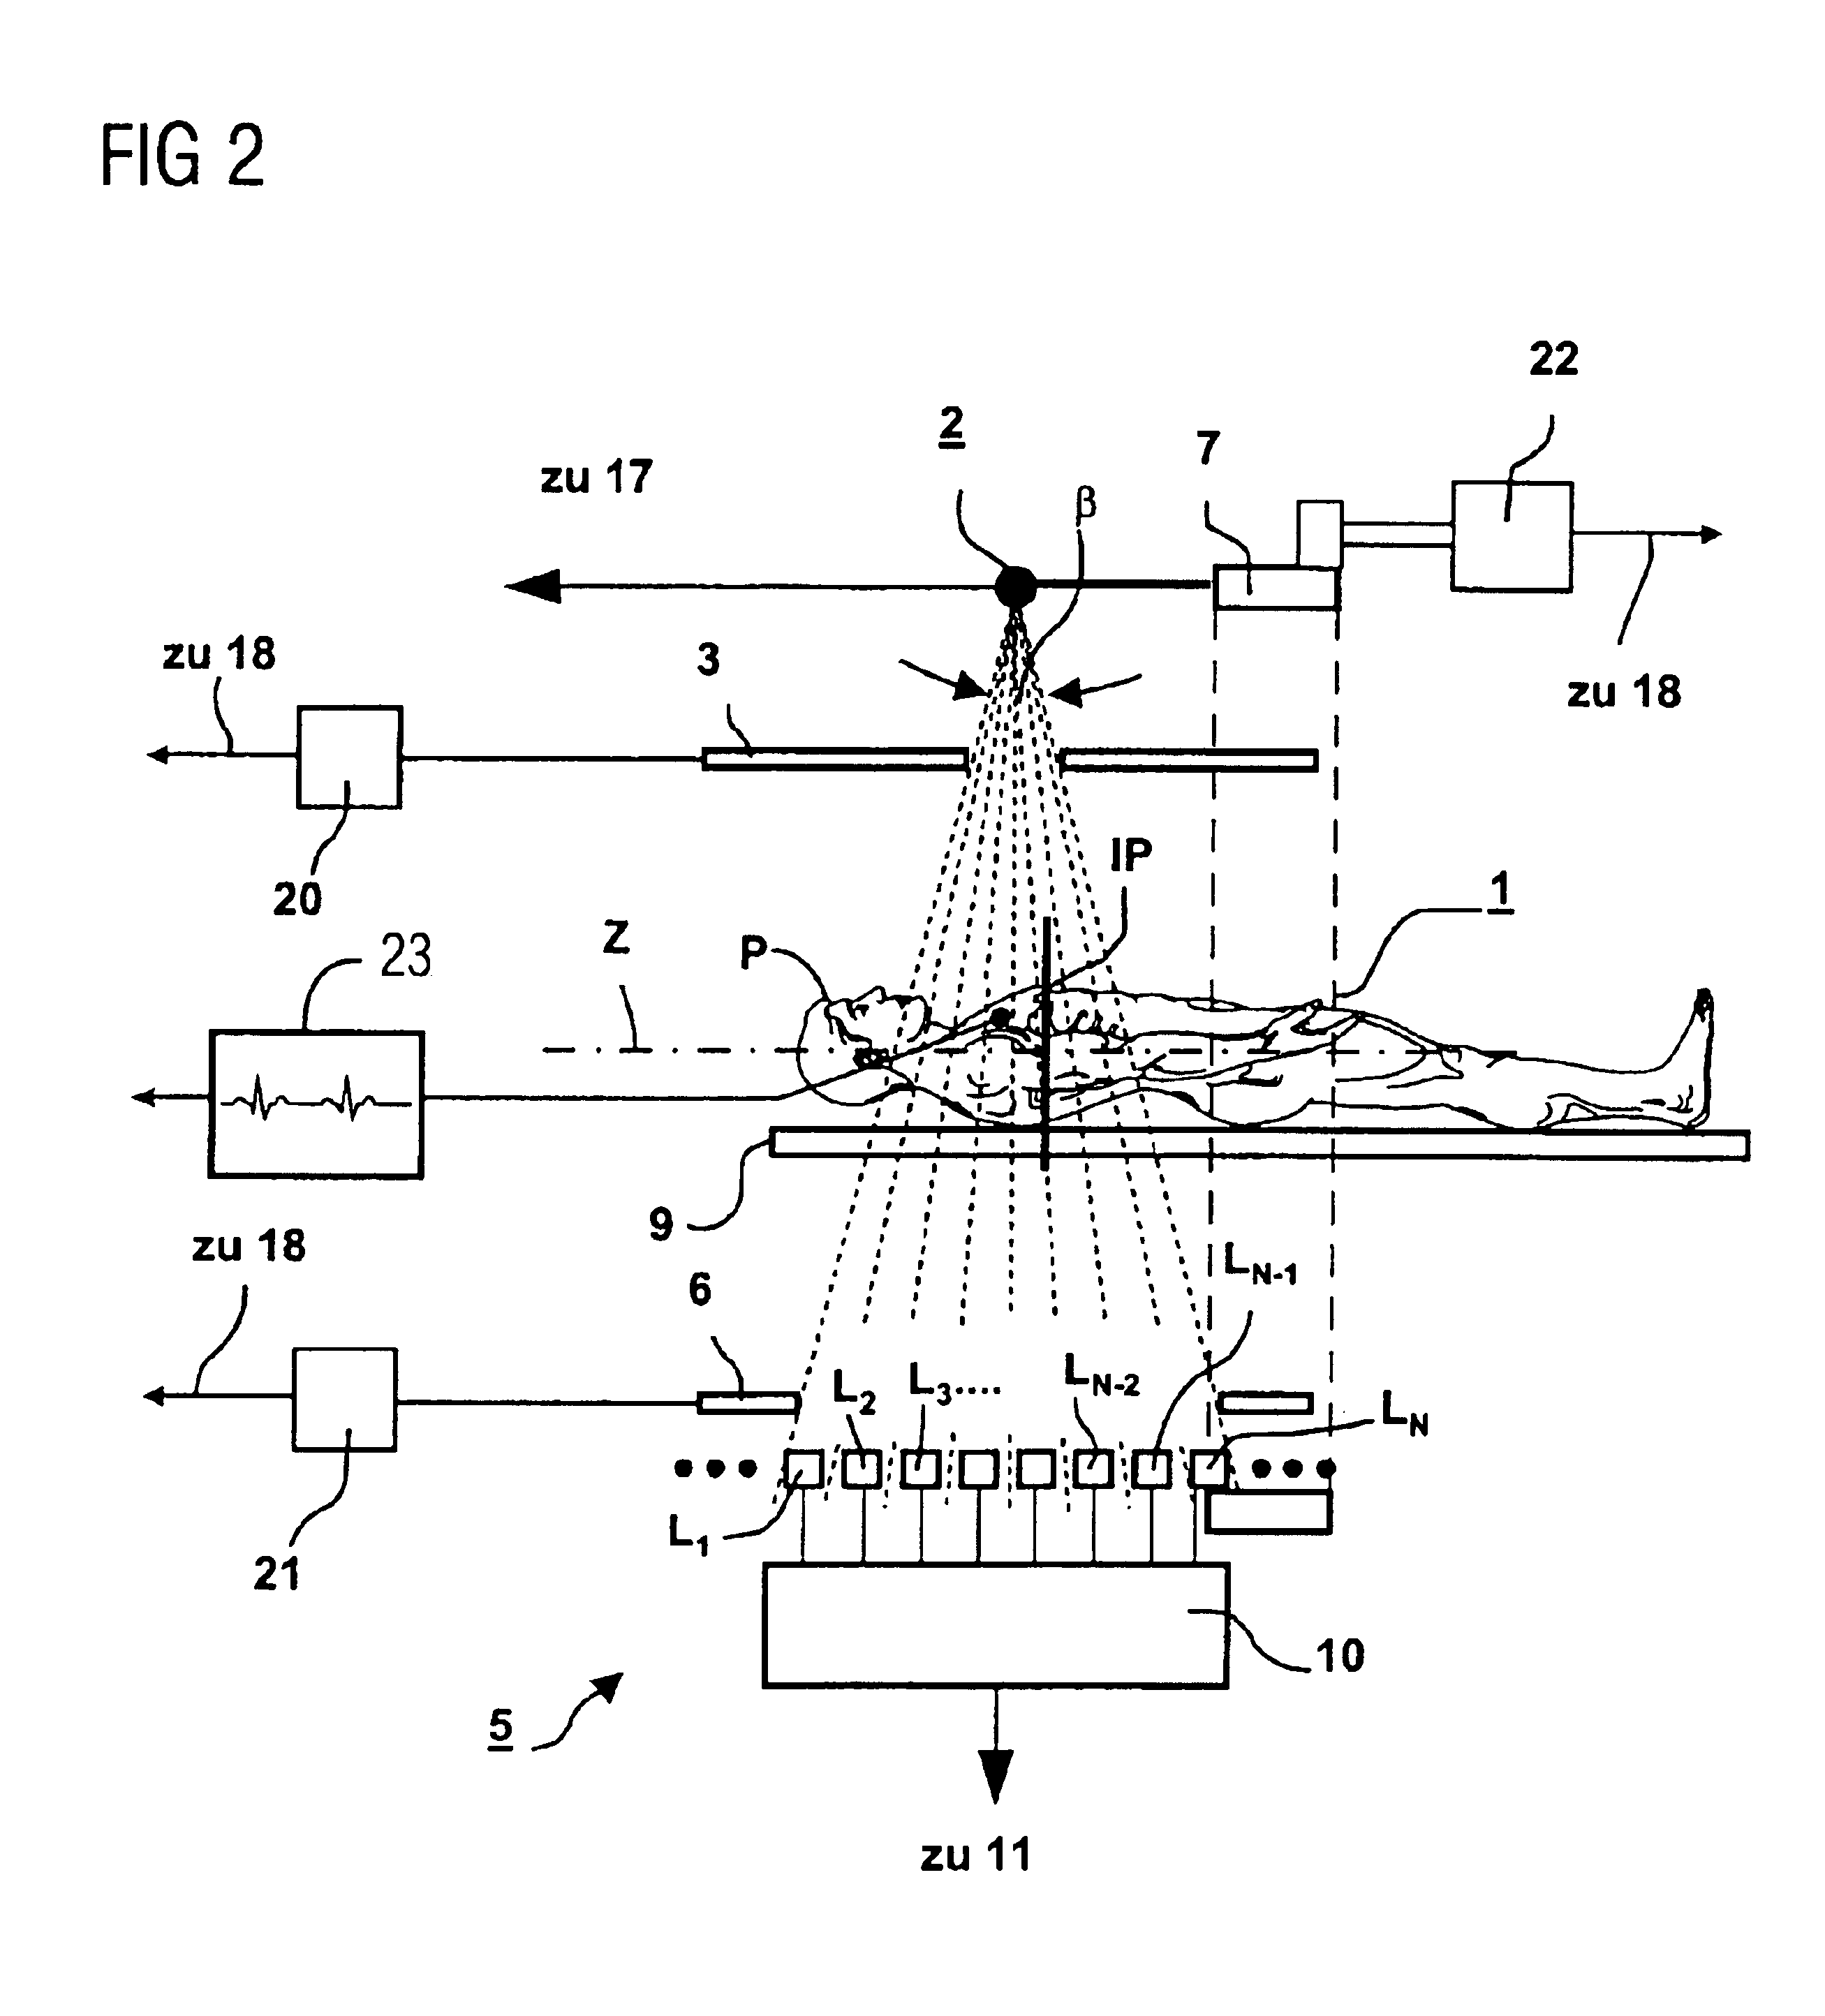 Method for computed tomography of a periodically moving object to be examined, and a CT unit for carrying out this method